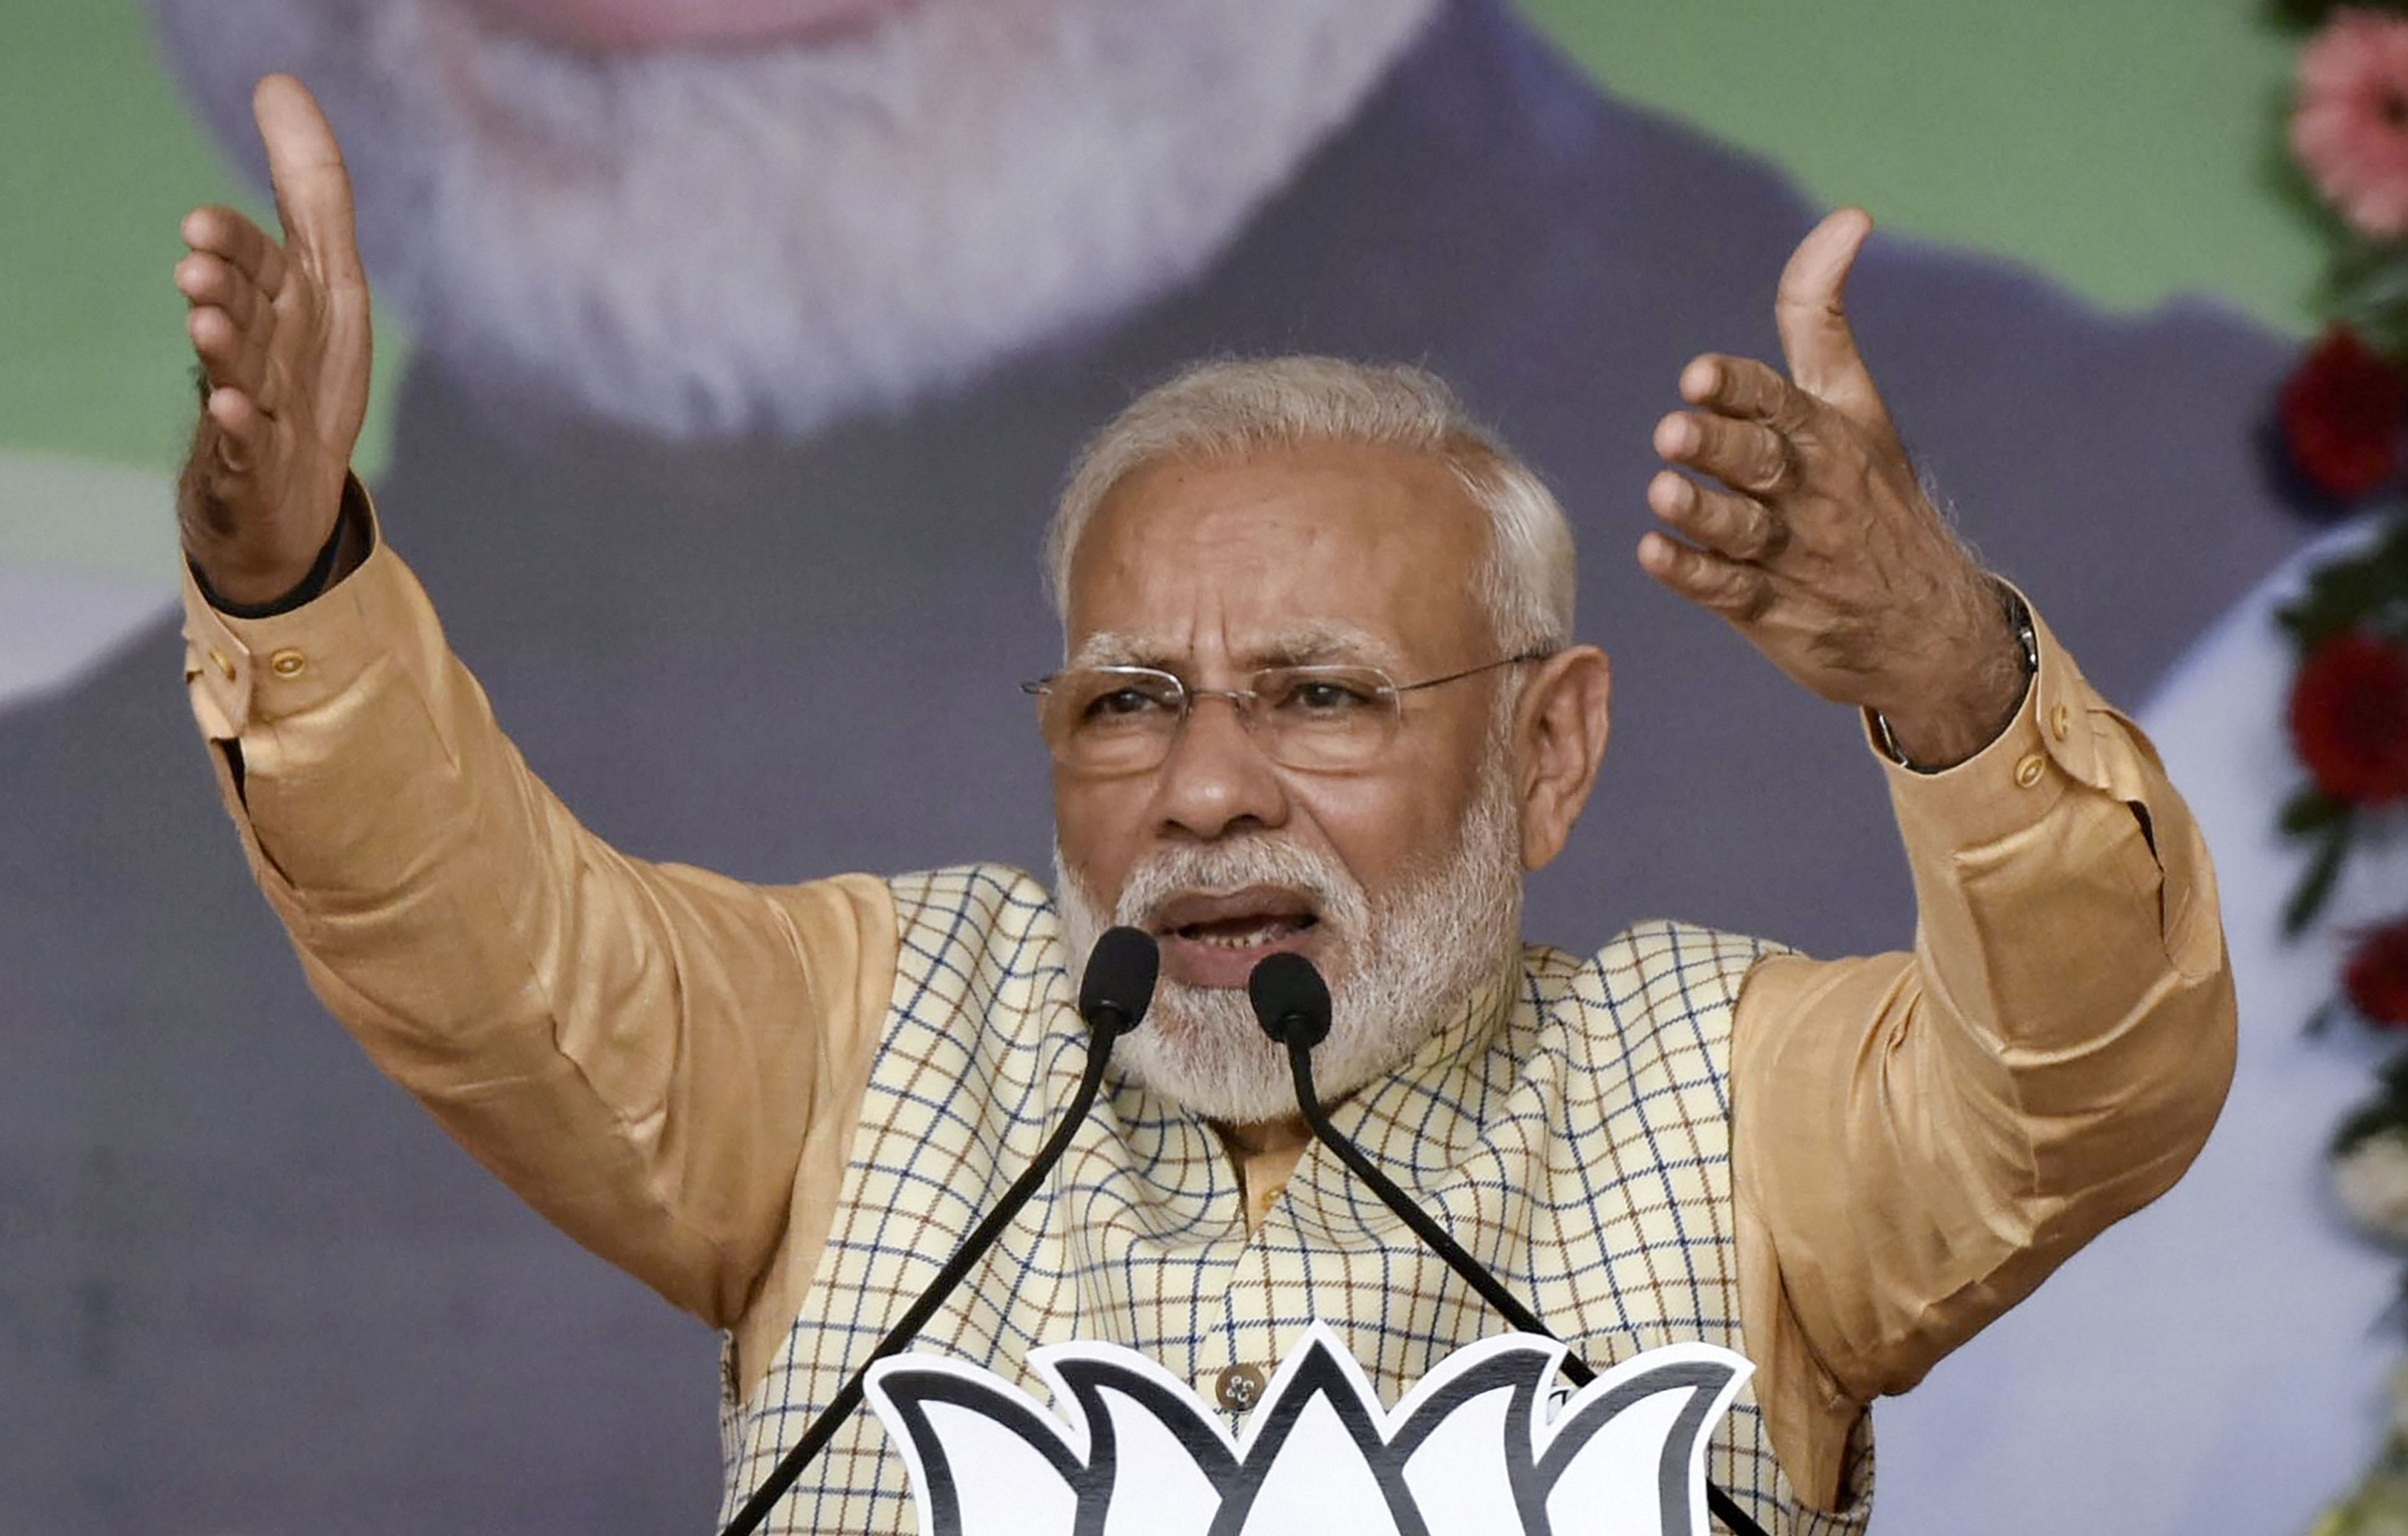 Jharkhand CMs chair was up for sale during Congress-JMM rule: Modi